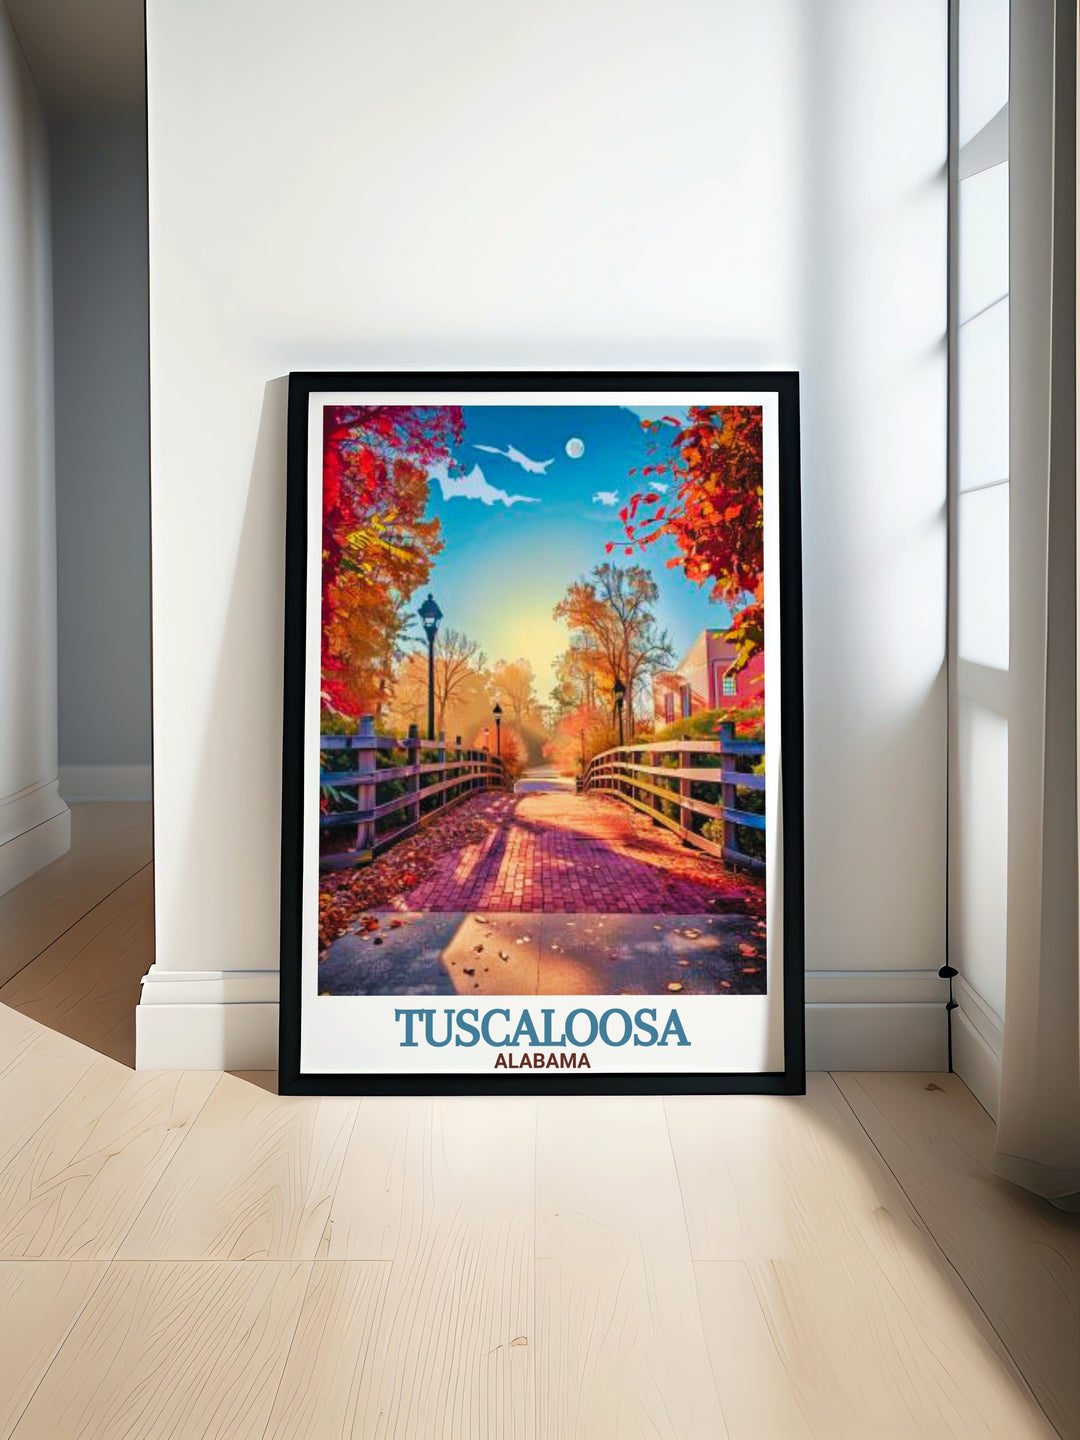 Alabama poster featuring the vibrant Tuscaloosa skyline and the iconic Tuscaloosa Riverwalk perfect for Tuscaloosa decor and gifts bringing the citys charm and energy into any home or office with stunning Tuscaloosa wall art and modern prints